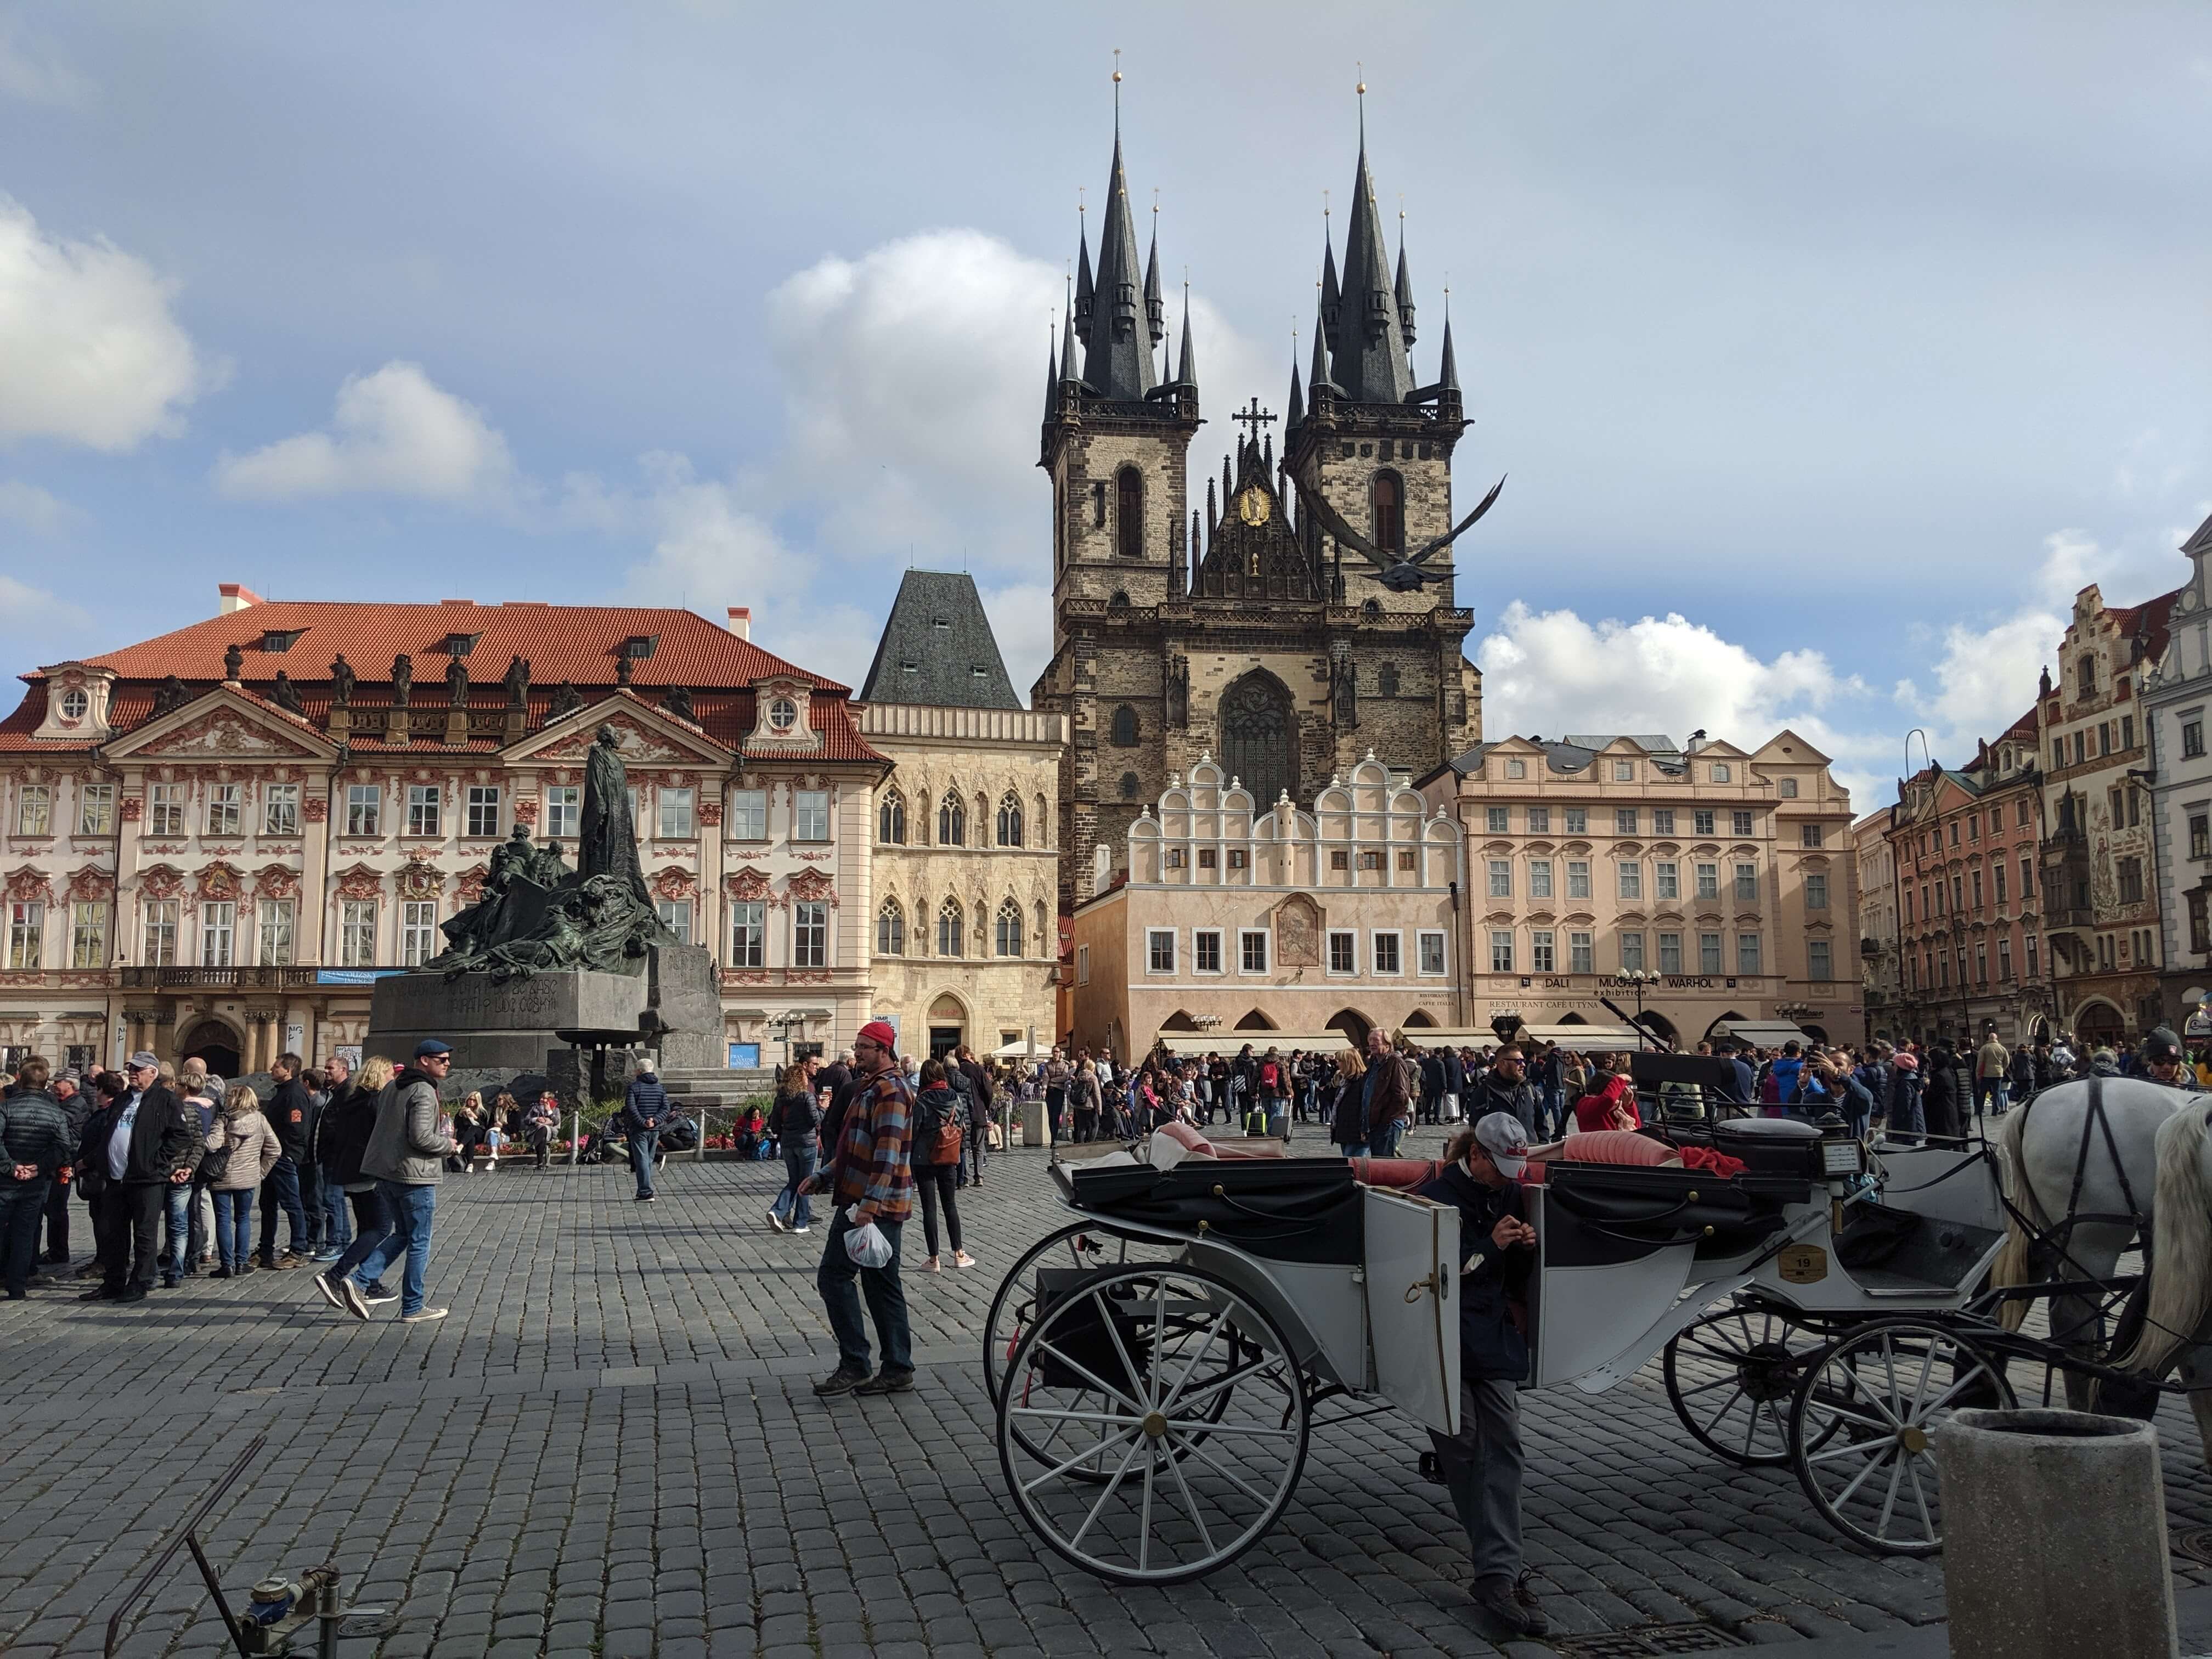 People Walk Around the Square in 2019 Where the Prague Astronomical Clock is Located